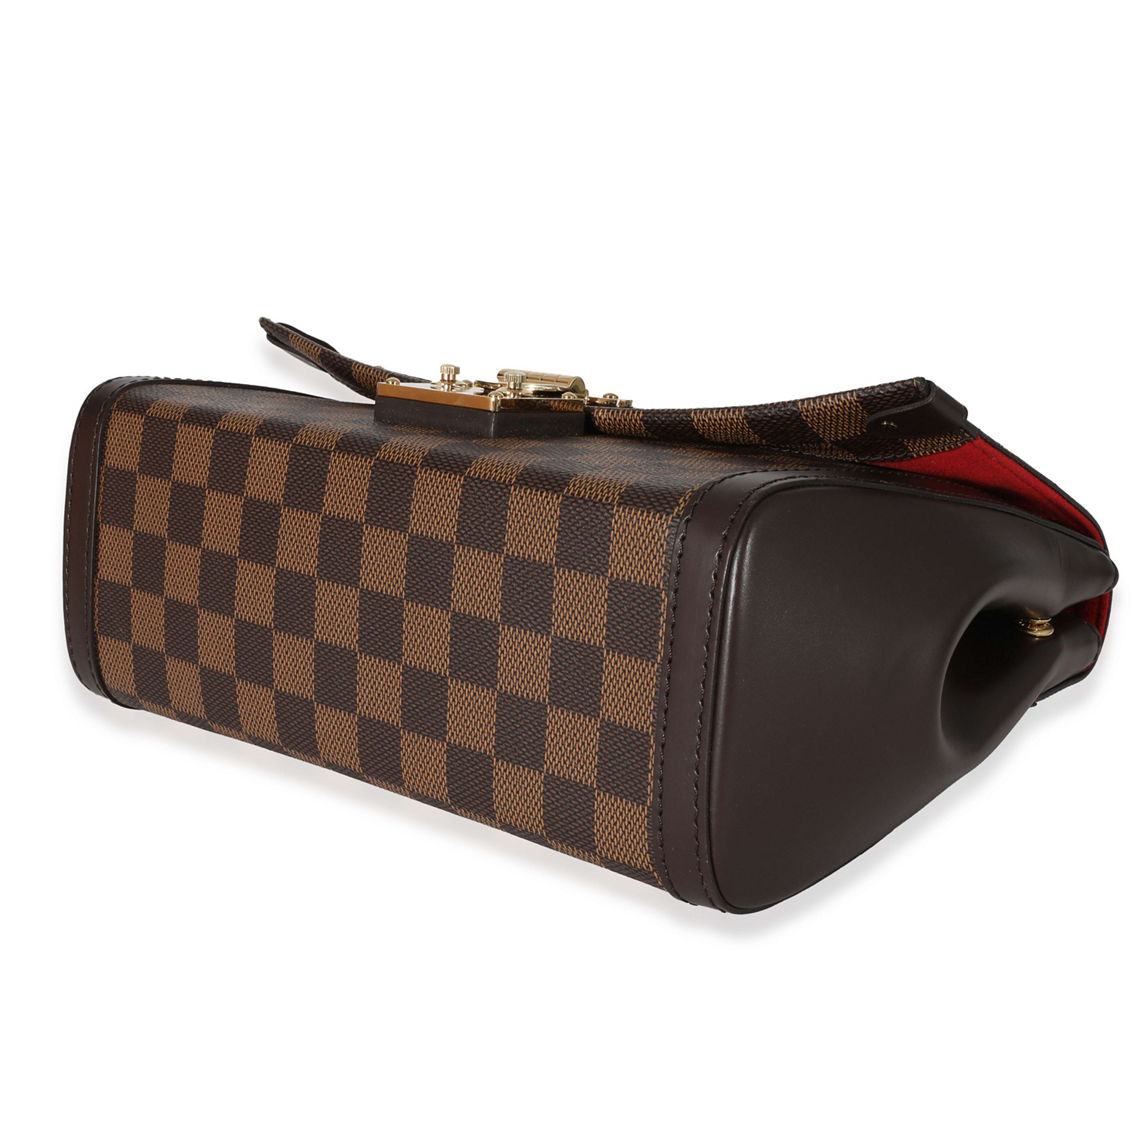 Louis Vuitton Venice Pre-Owned - Image 3 of 4